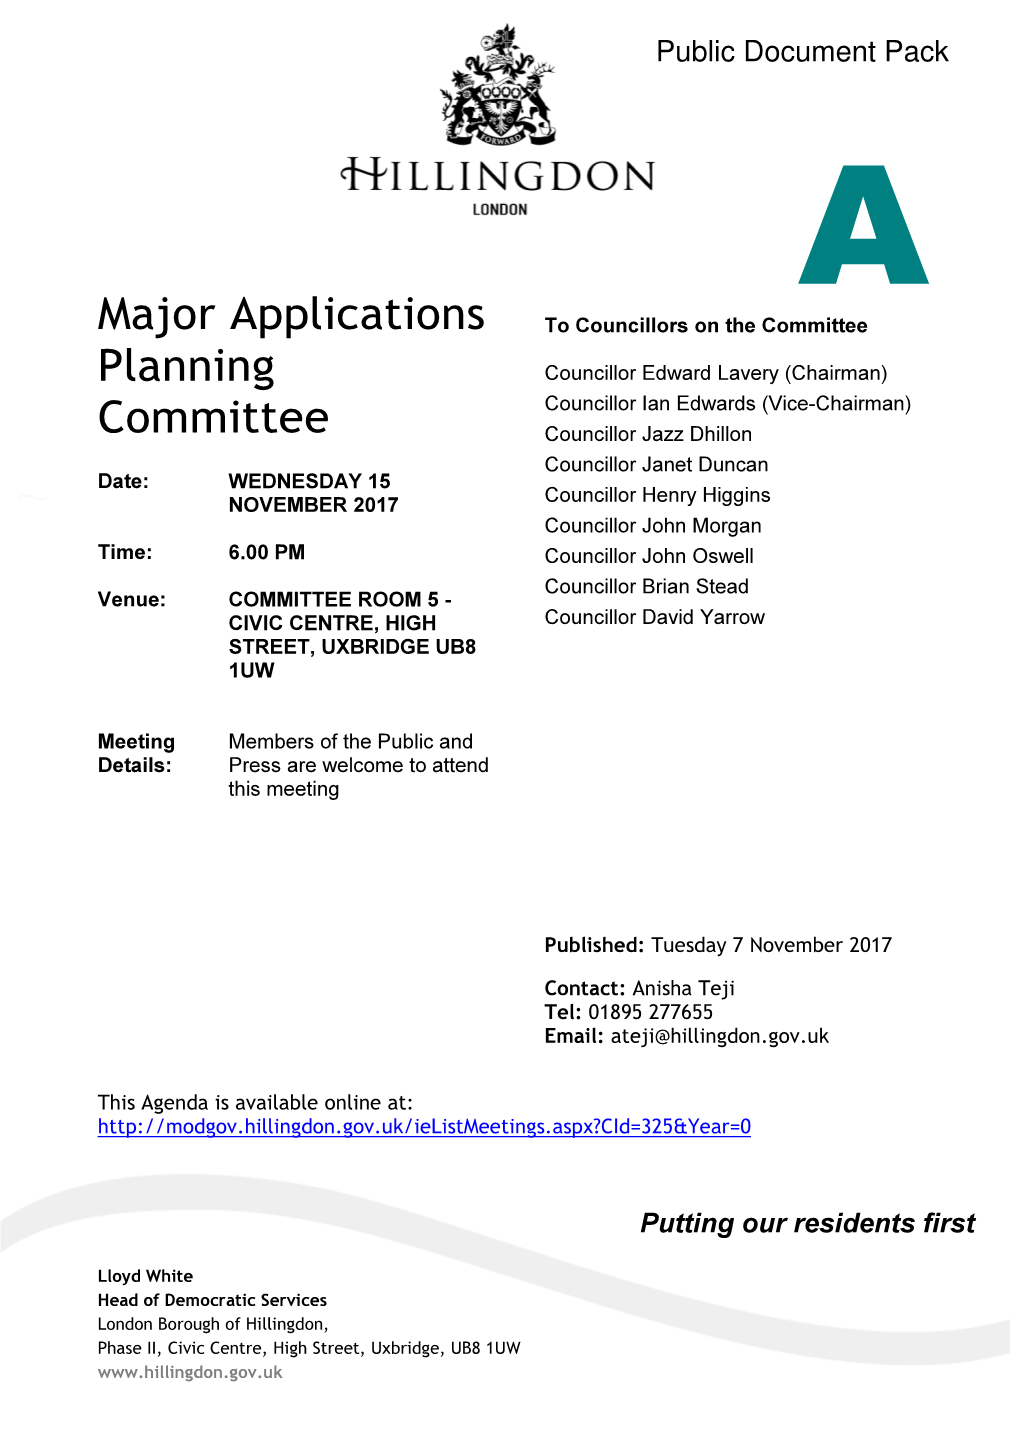 Major Applications Planning Committee 73 - 118